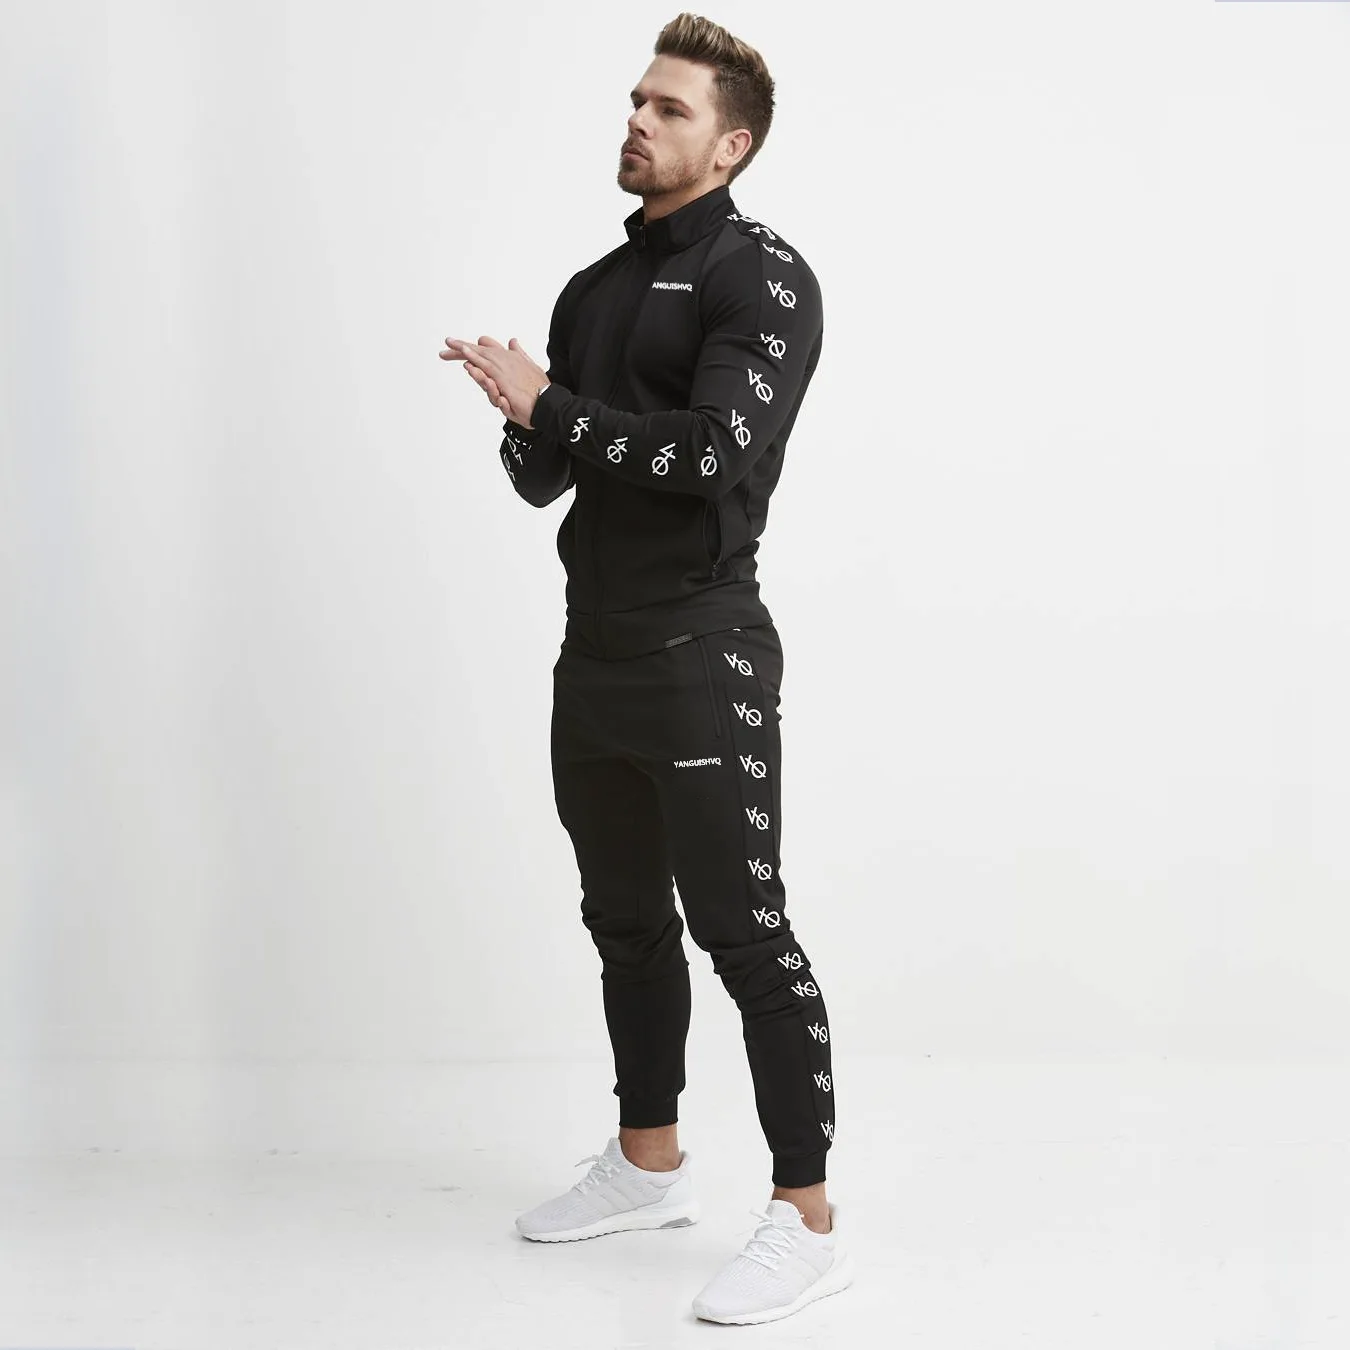 

Menâ€˜s Sport Suit Quick Dry Sports Suits Loose Tracksuits Mens Spring Autumn Fitness Running Suits Set Warm Jogging Tracksuit